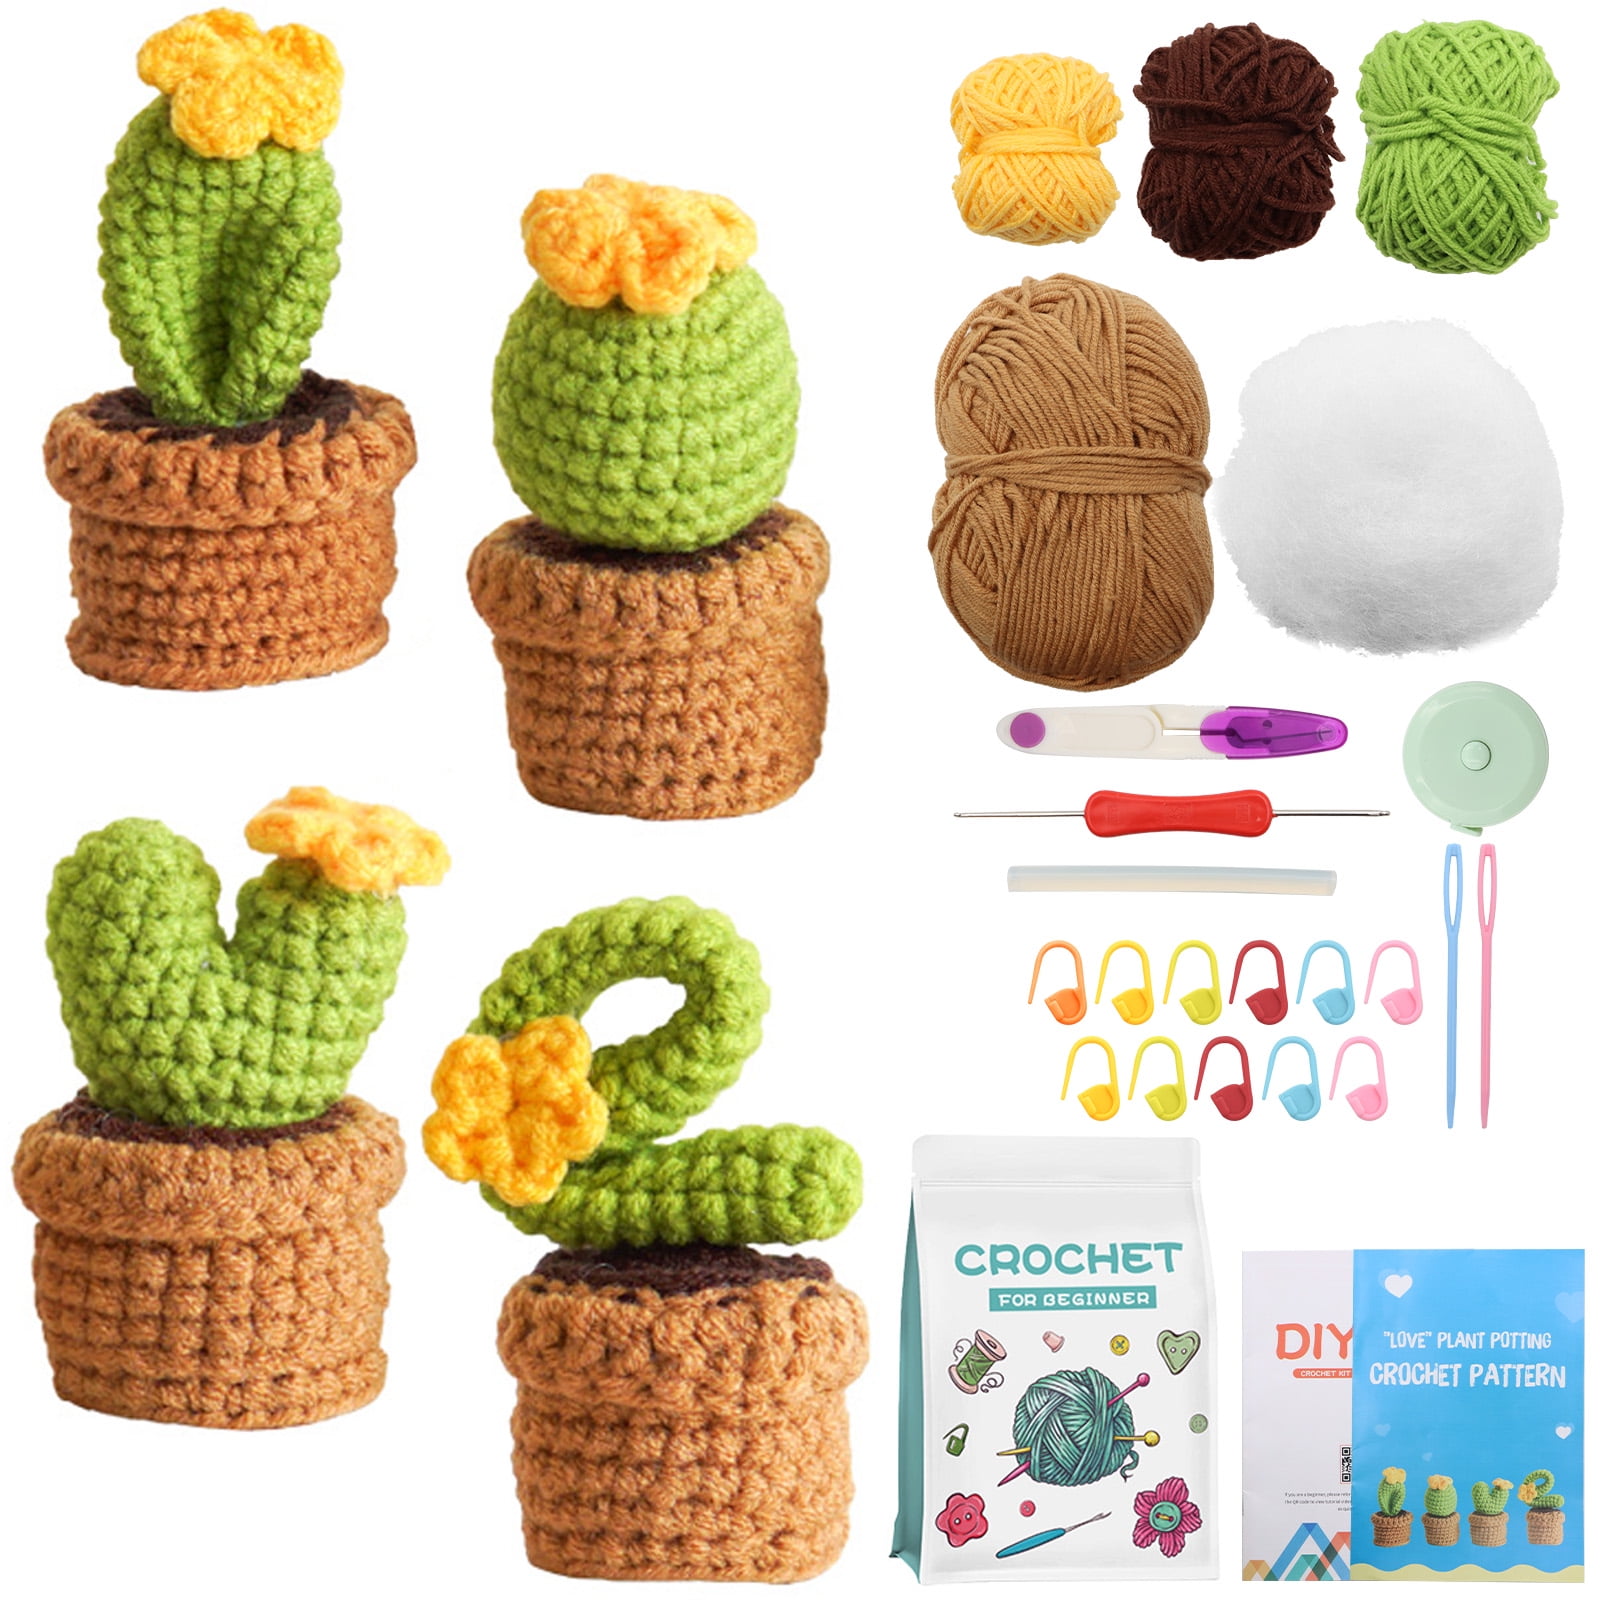 QSHQ Crochet Kit for Beginners, Crochet Starter Kit for Adults and Kids  Complete Knitting Kit to Make 2Pcs Animals, Learn to Crochet with  Step-by-Step